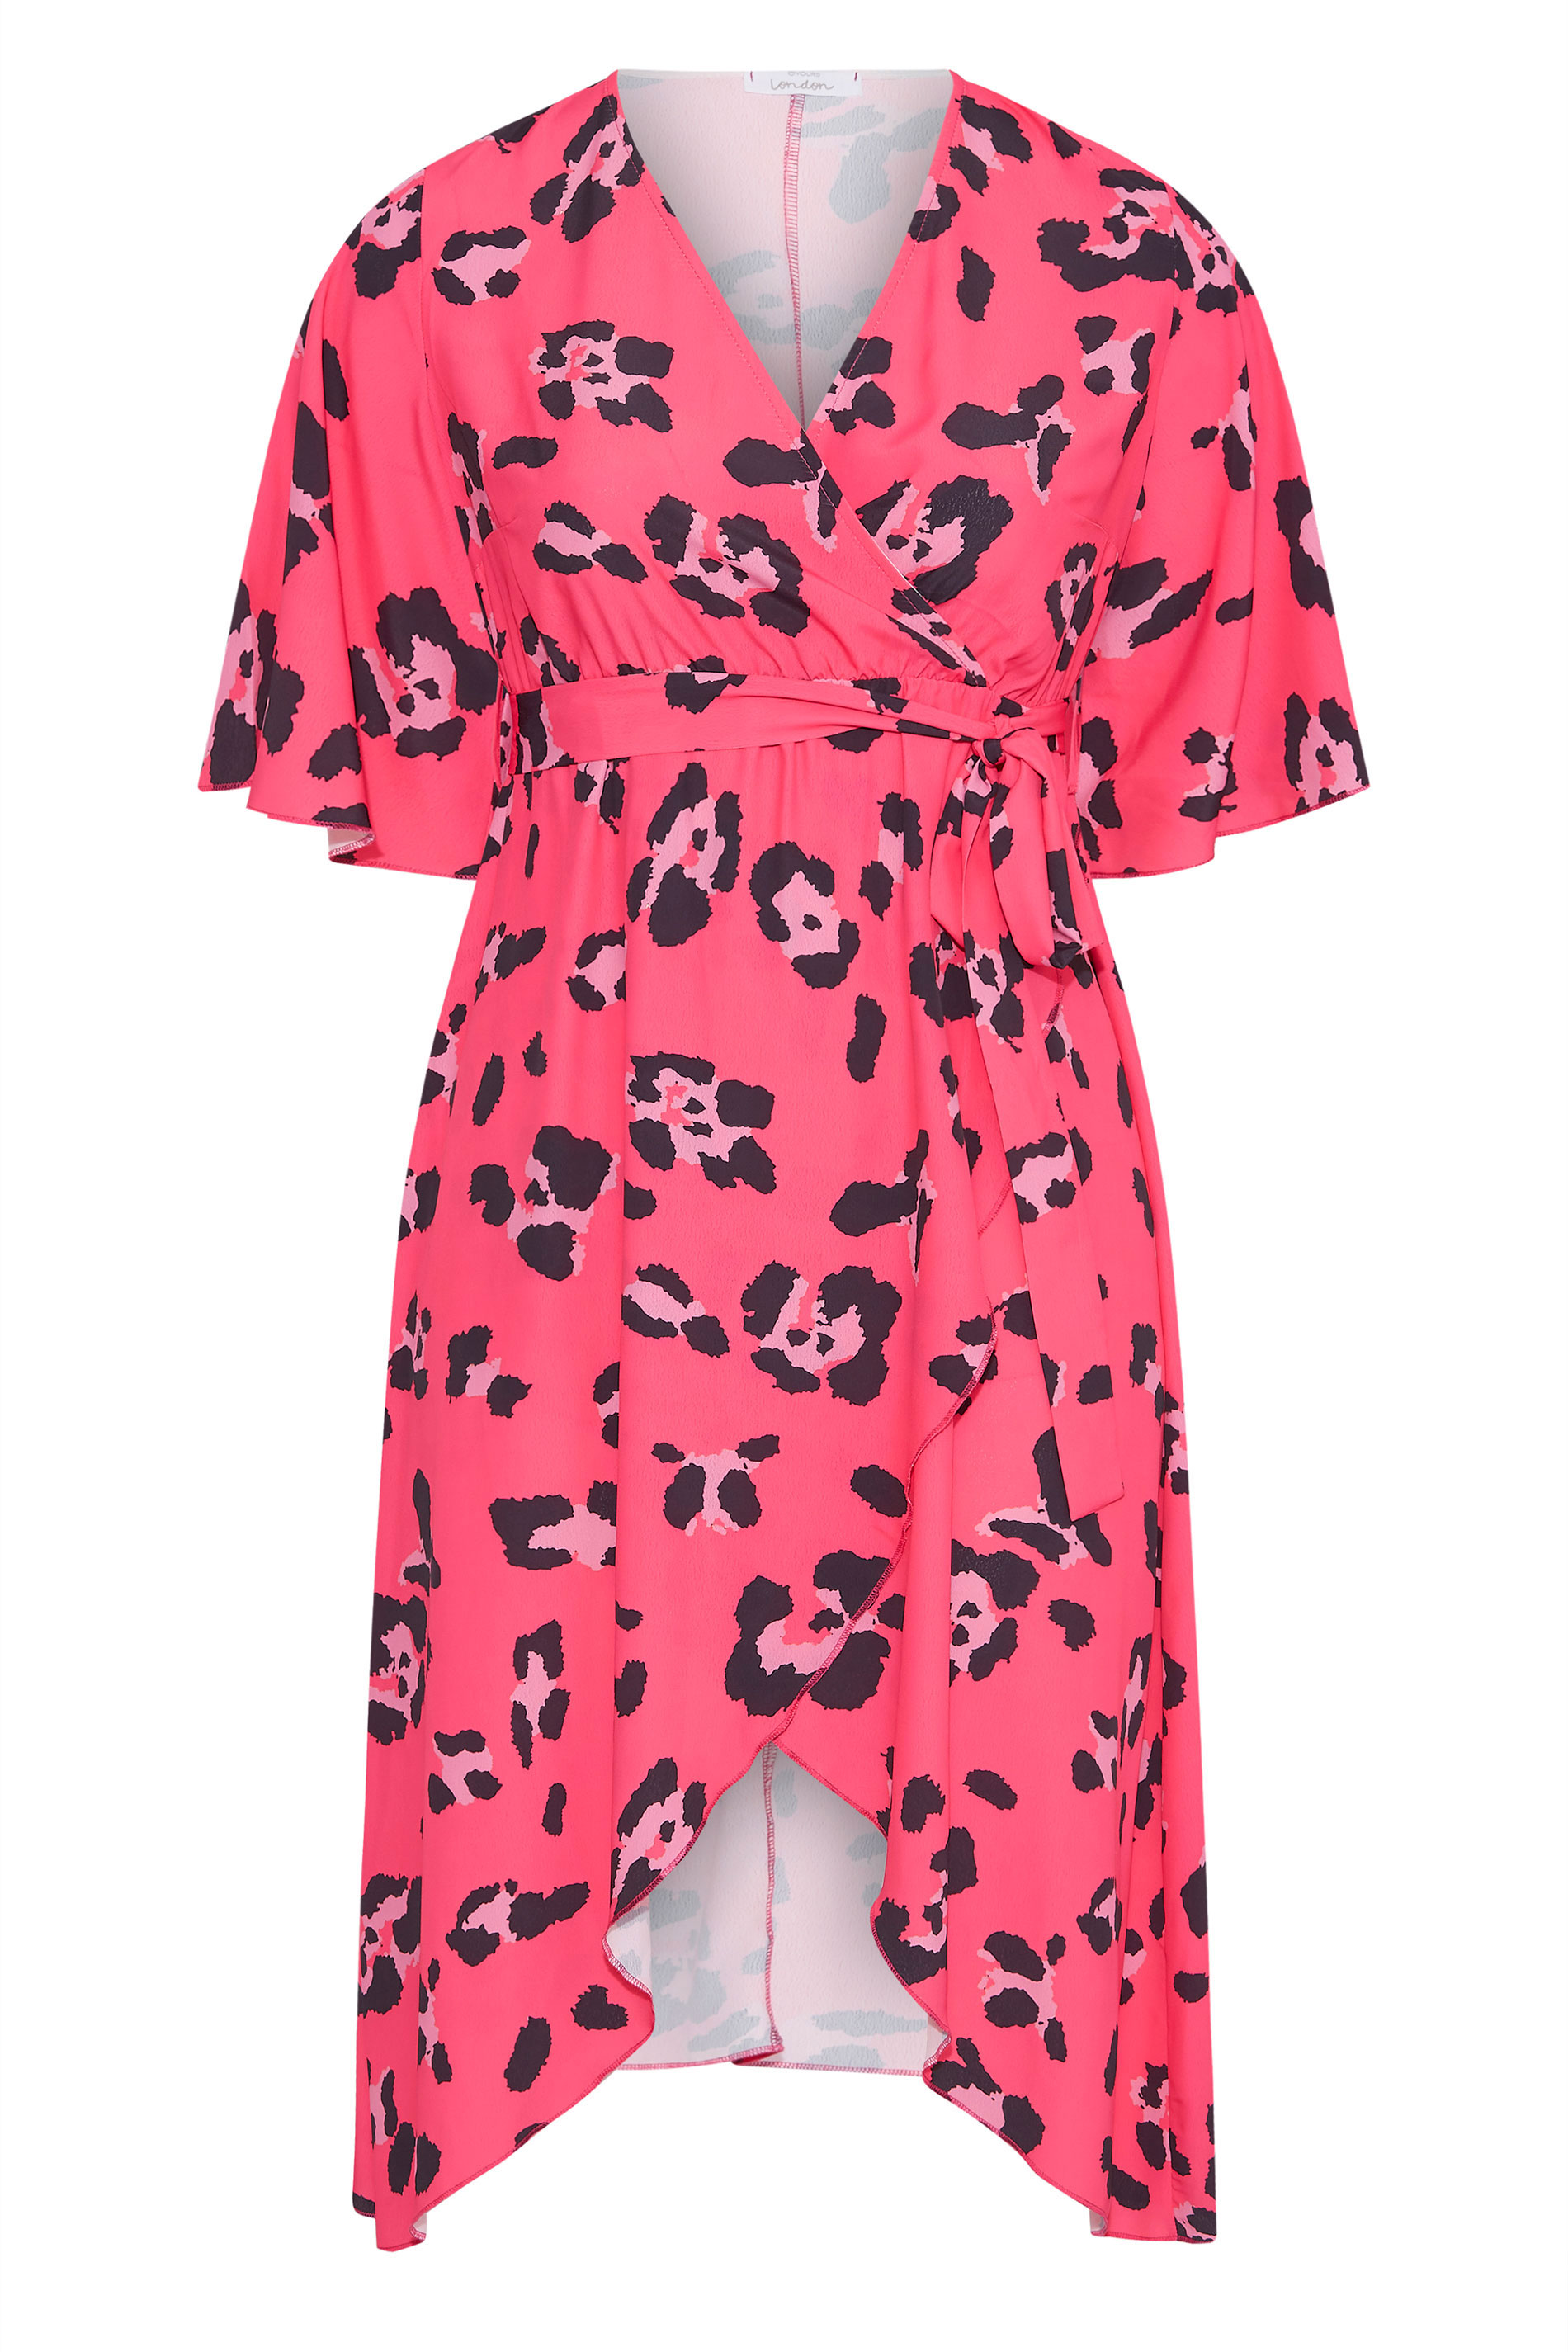 YOURS LONDON Plus Size Bright Pink ...